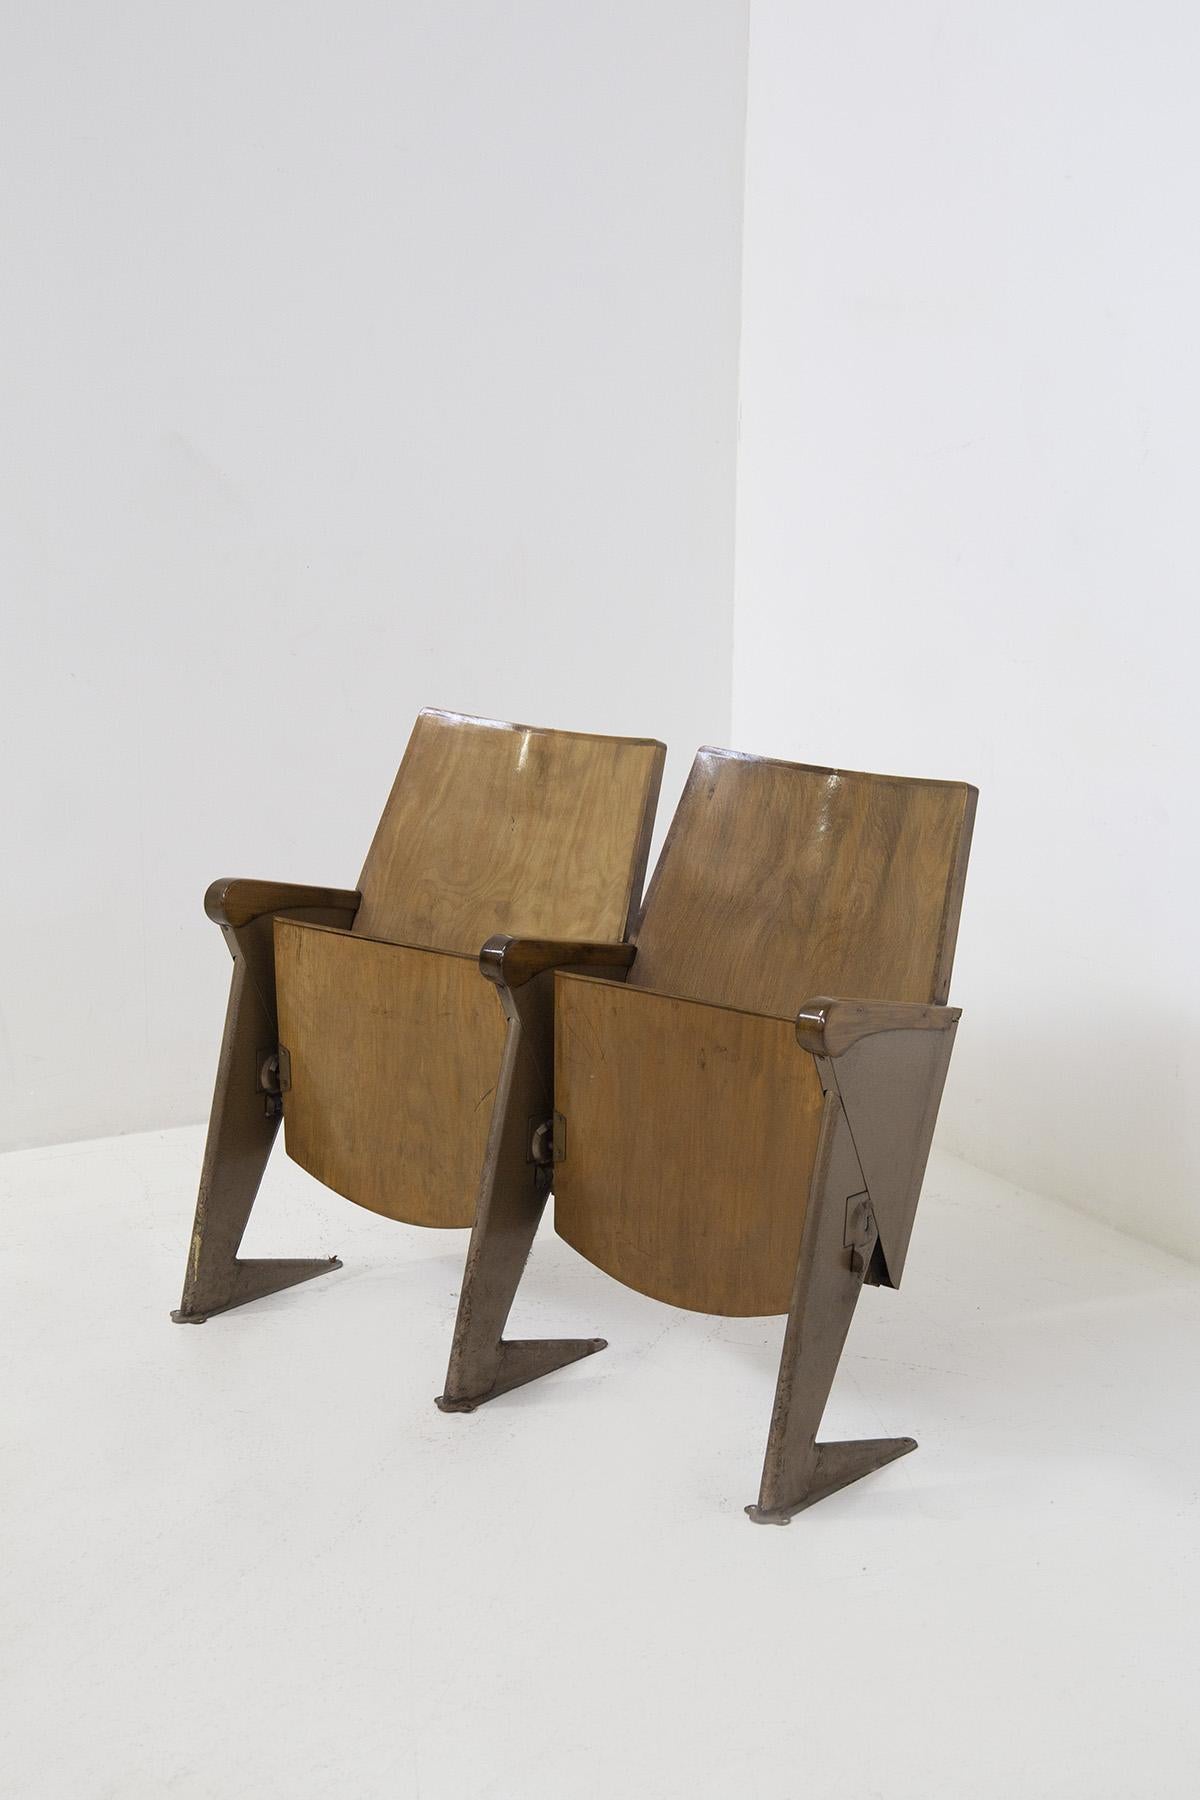 Rare pair of cinema chairs by Gastone Rinaldi for the IL Piccolo Milano theater in 1952. The model in question is LV 4.
The pair of cinema or theater chairs are one of the earliest examples for the IL PICCOLO Theater in Milan. Made of wood for the